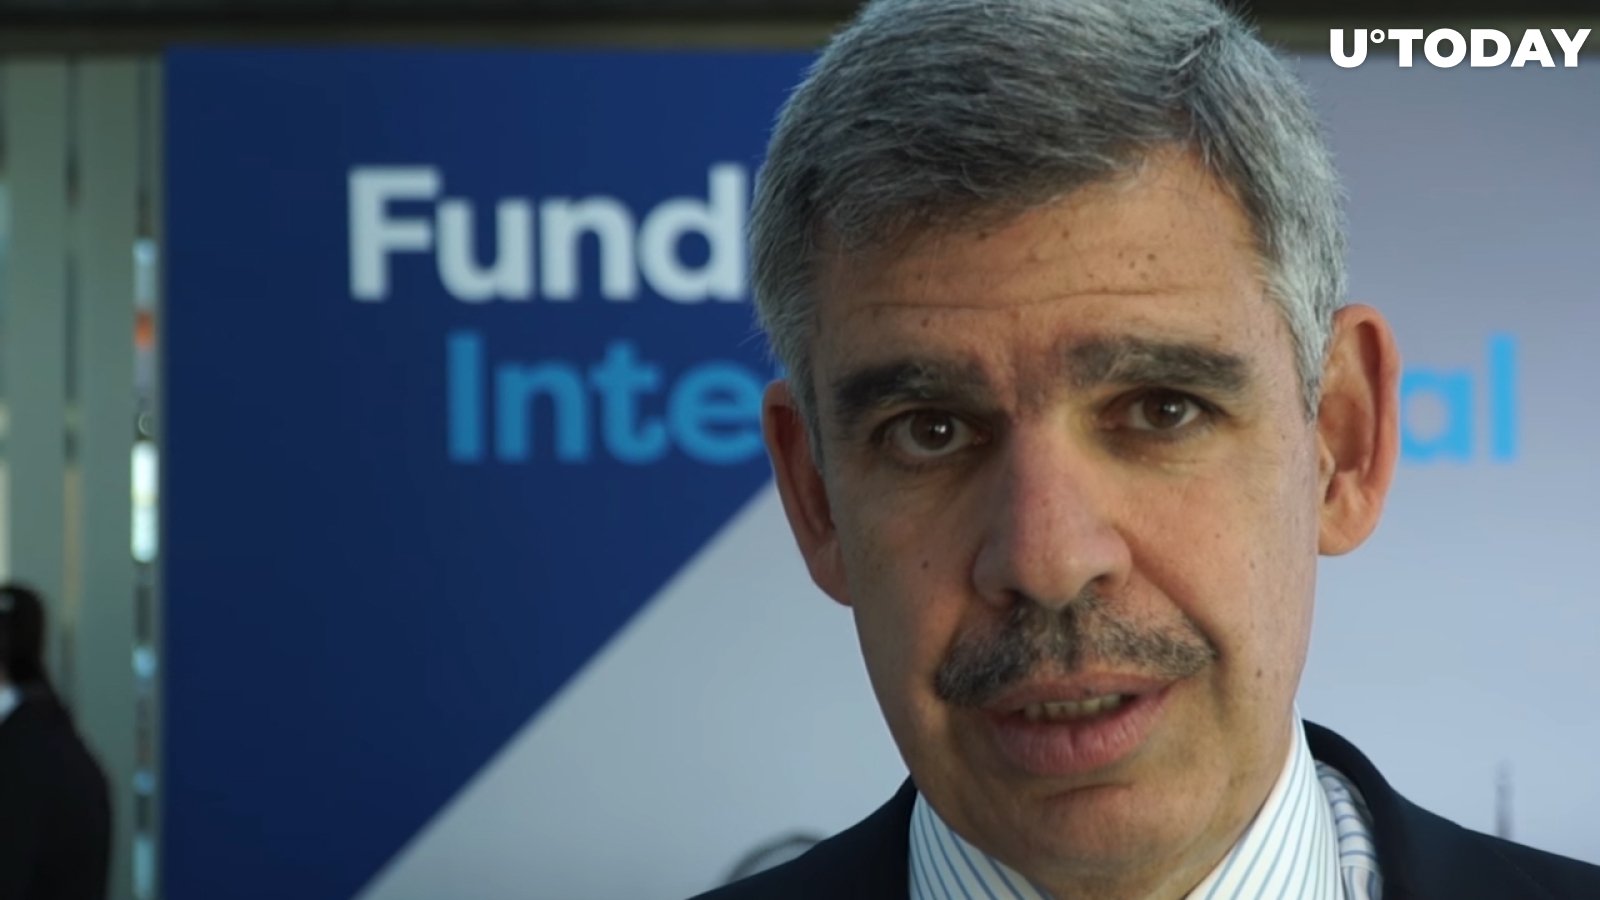 Famous Economist Mohamed El-Erian Bought Bitcoin at $3,000 and Sold Right Before $60,000 Rally